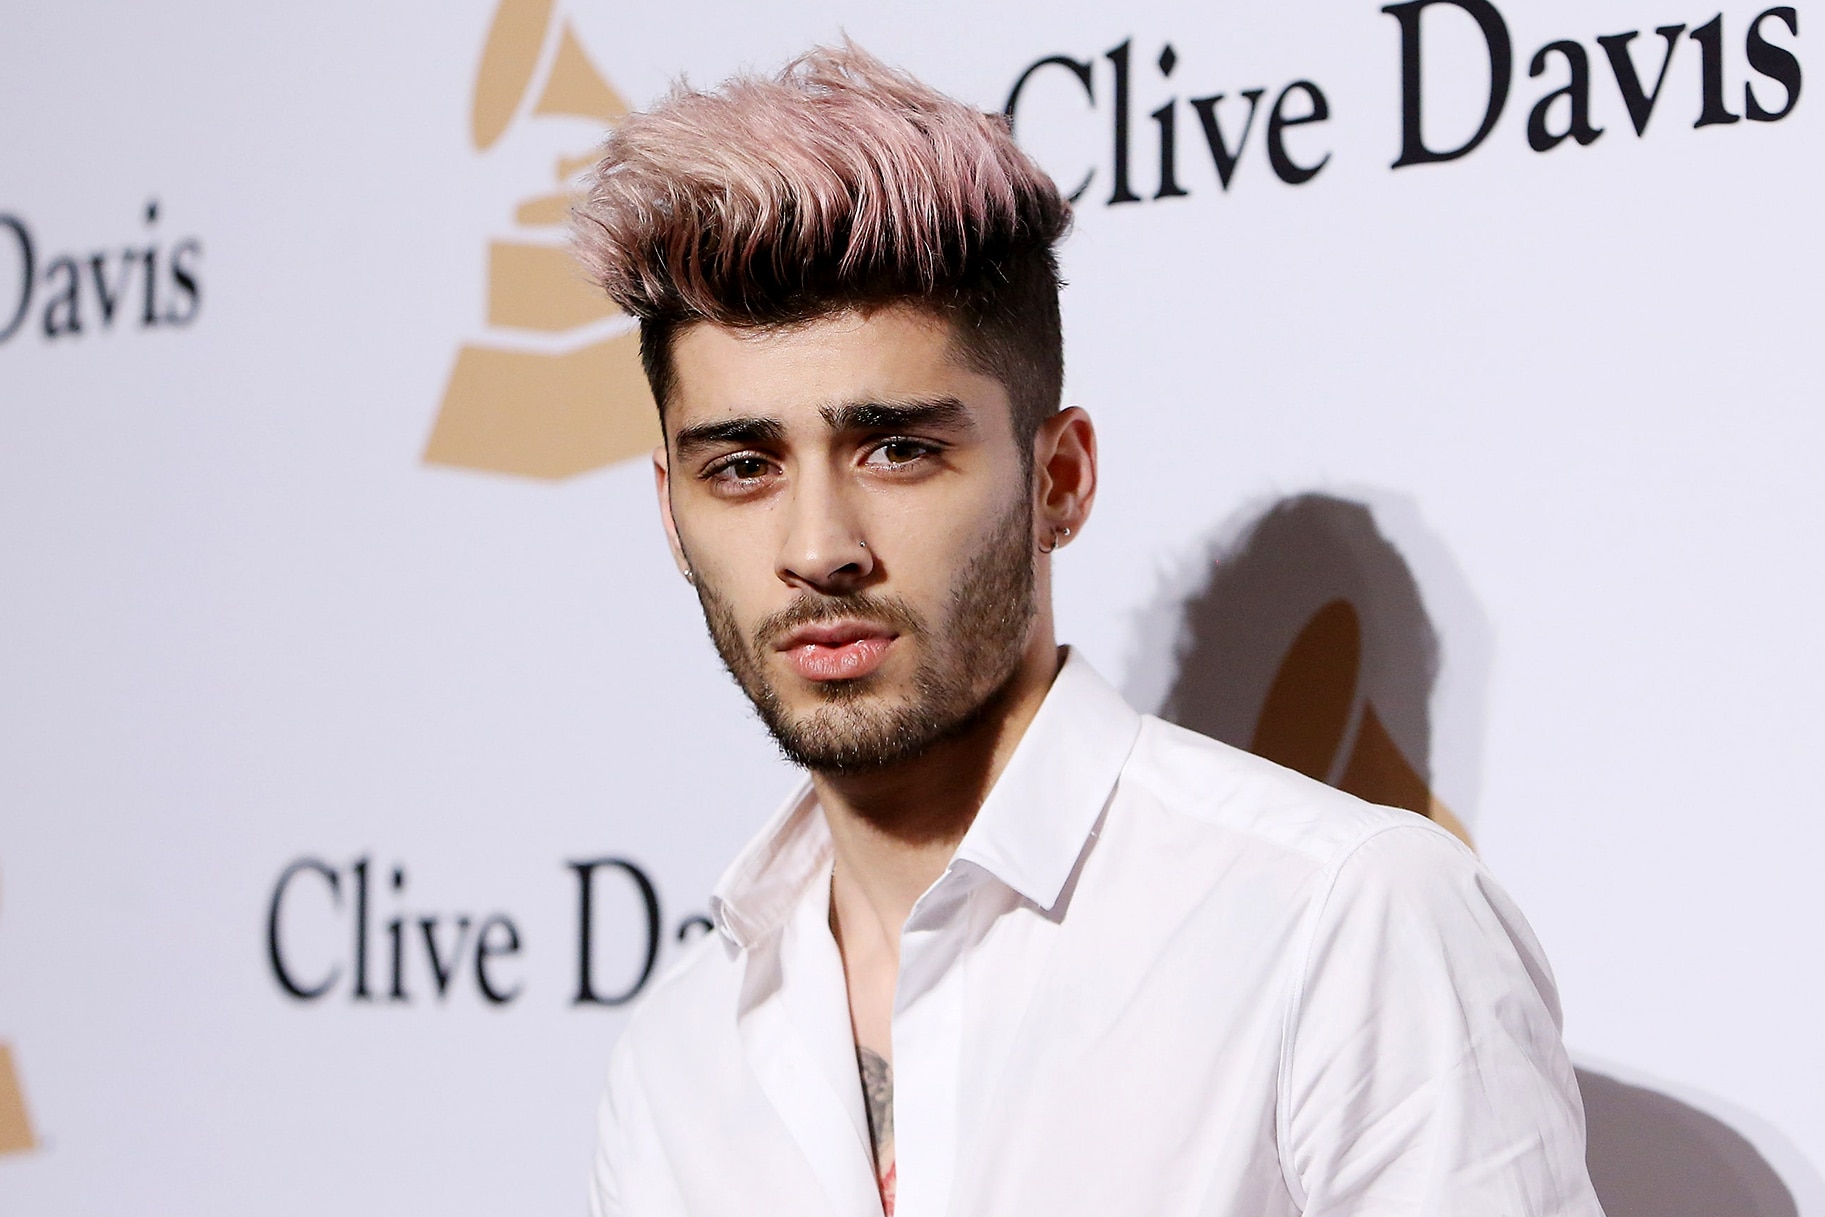 Zayn Malik Says He'd Be 'Stupid Not To' Play the Hit Song in Upcoming Tour